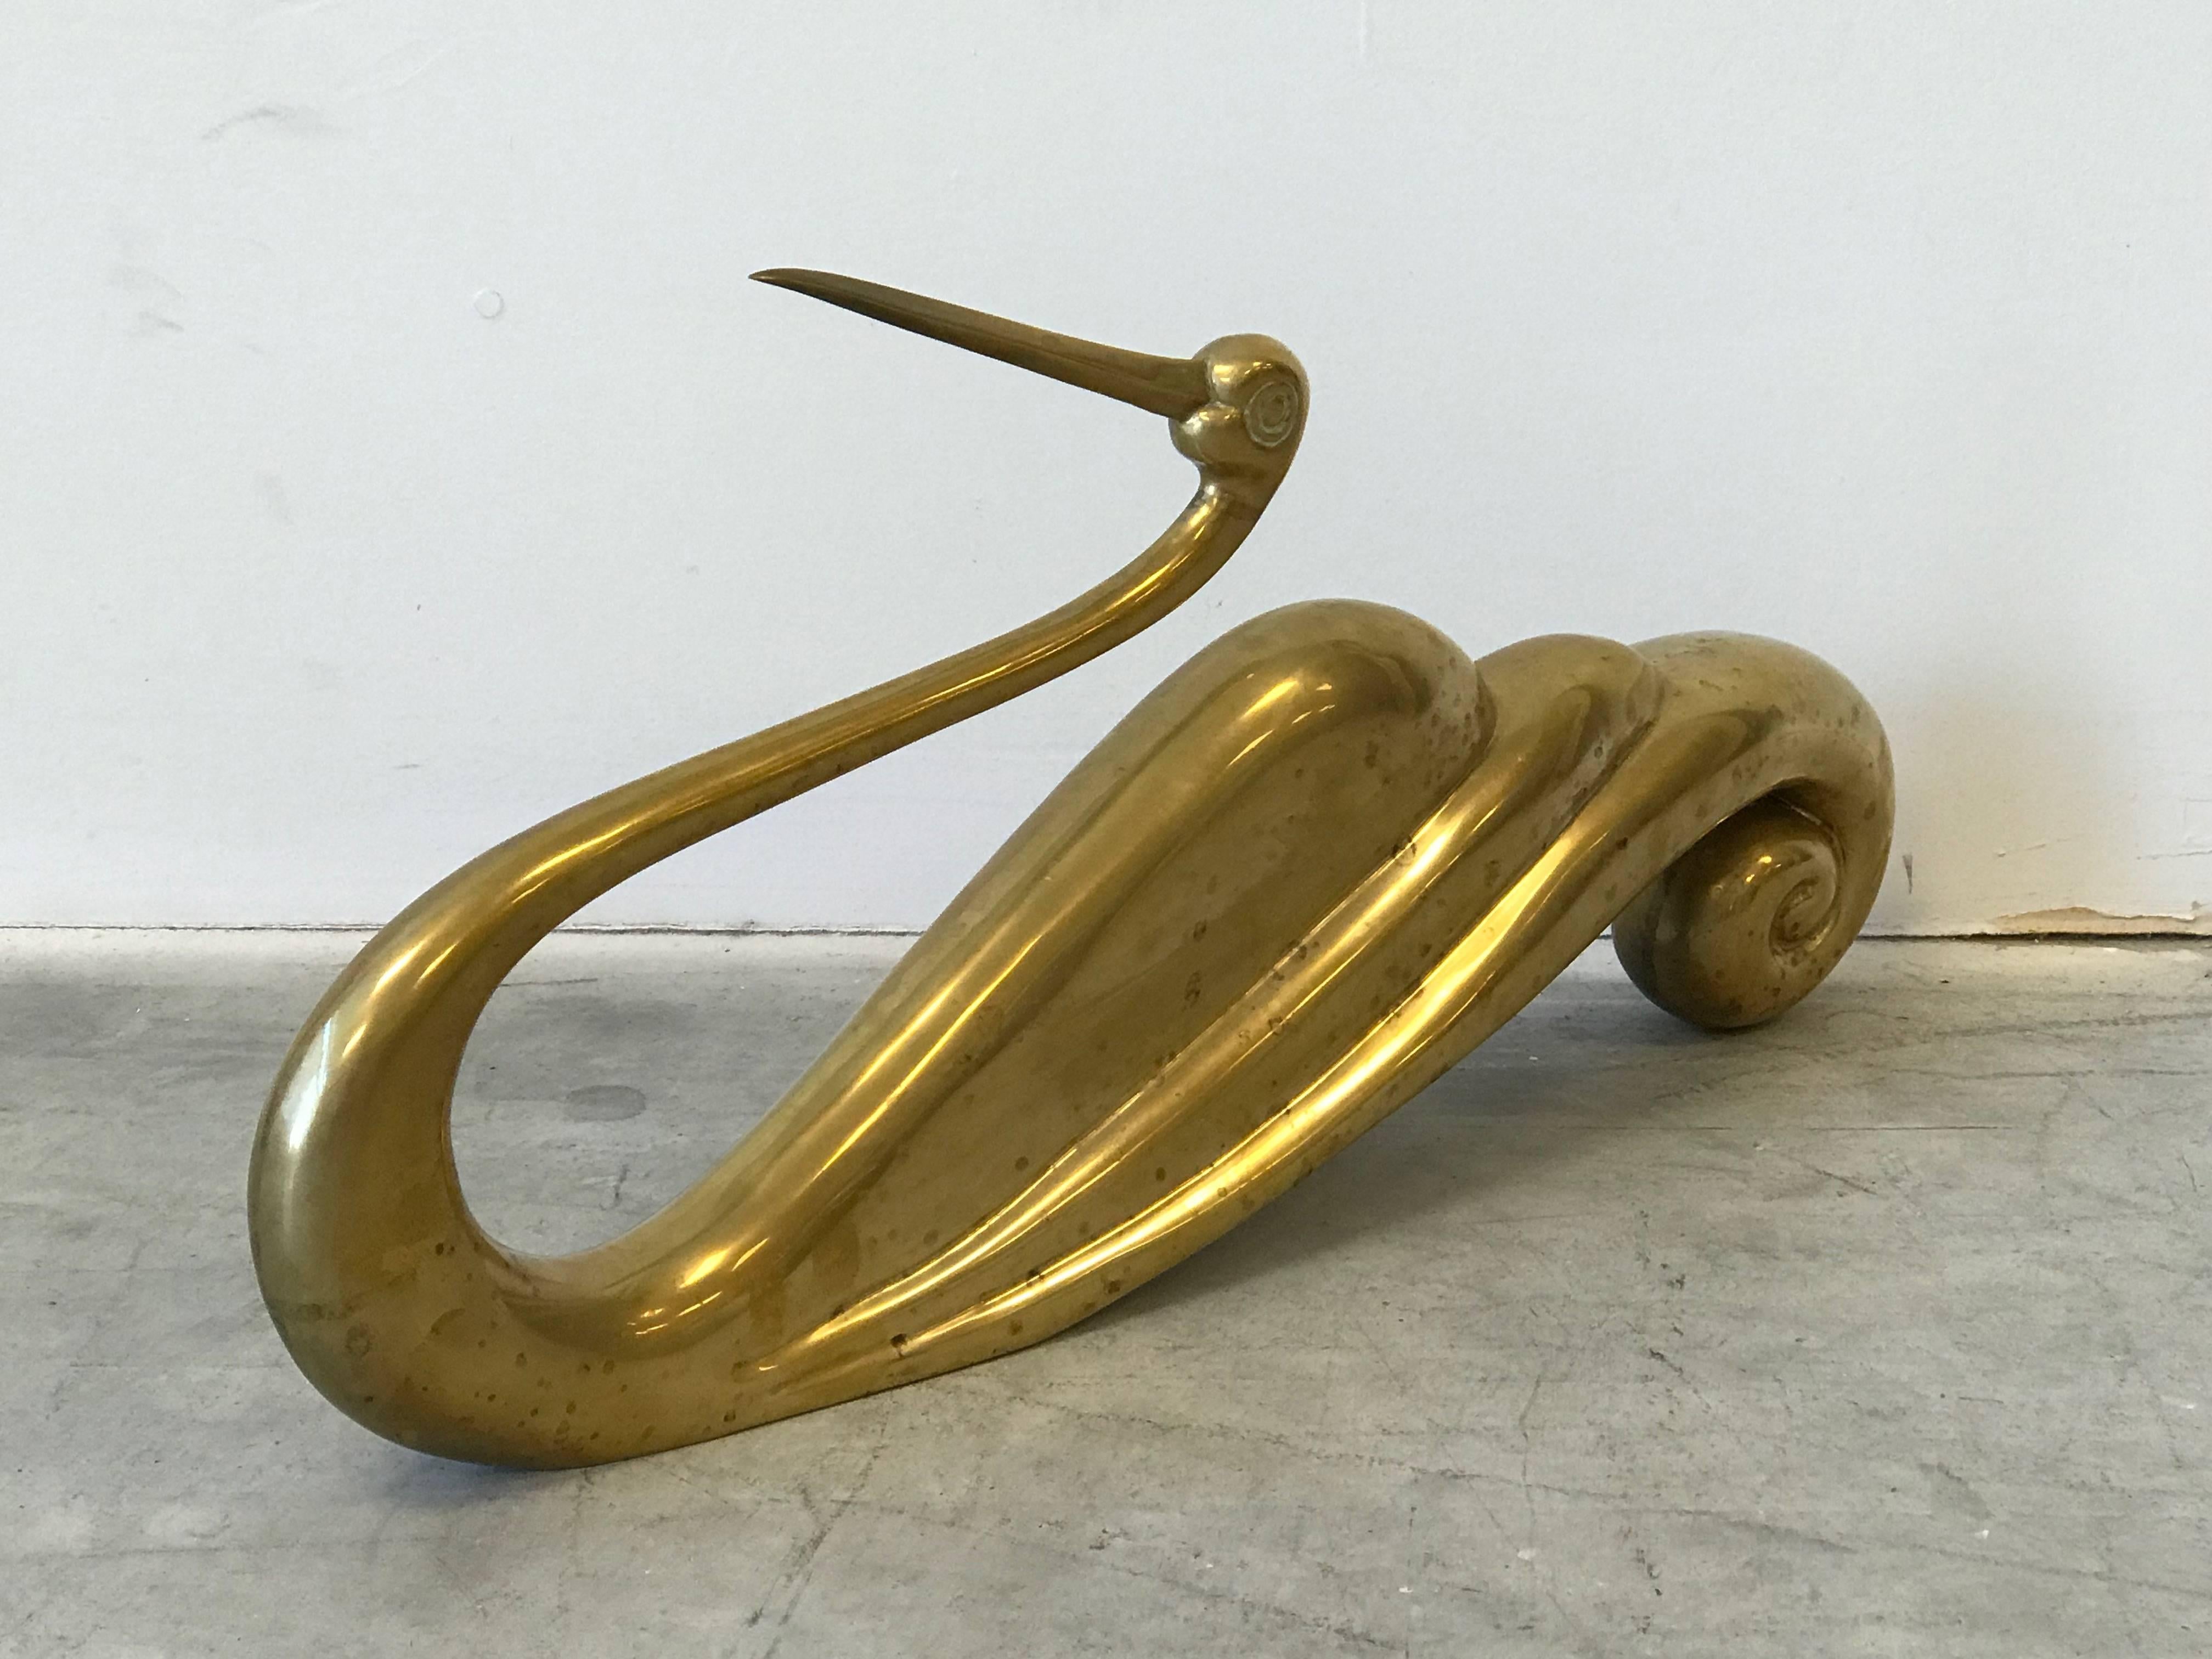 Offered is a stunning, 1950s modern, Art Deco style Italian brass bird sculpture. Either, swan or ibis. Heavy, solid-brass weighing 12.5 pounds.